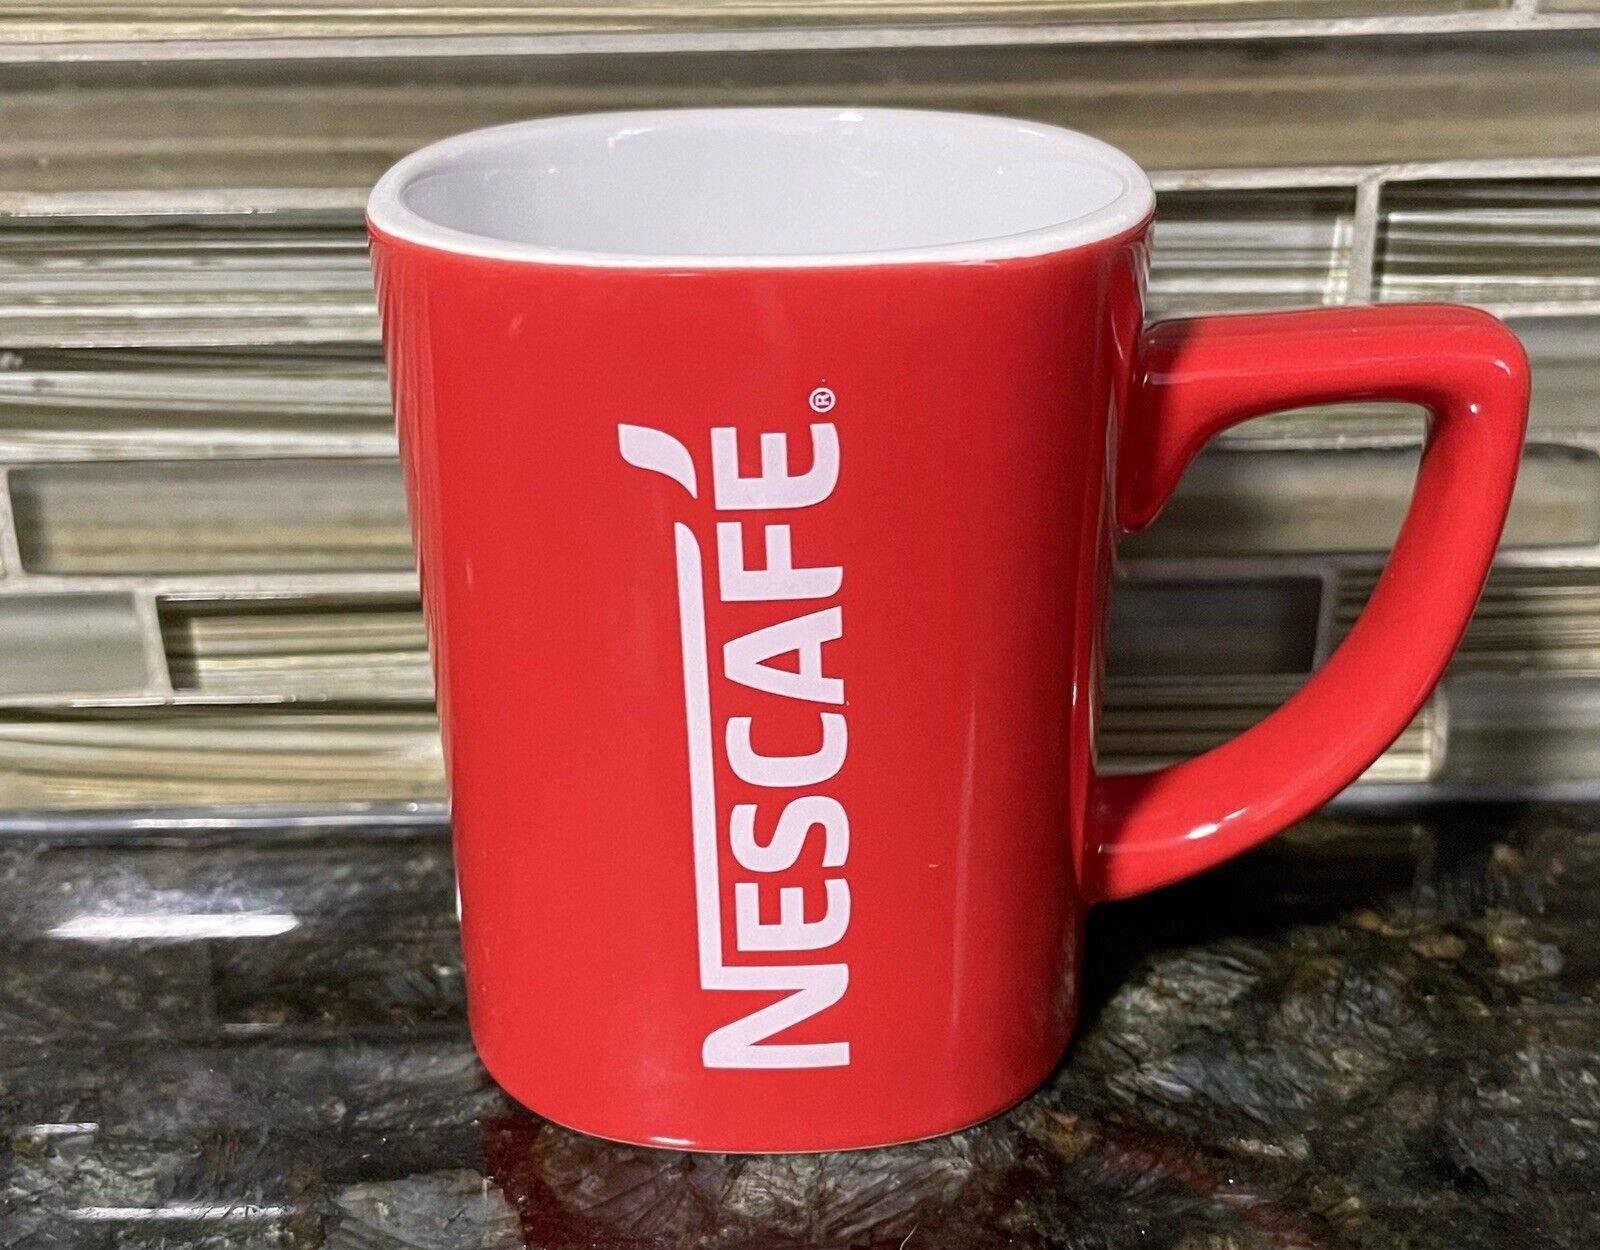 Nescafe, Collectible Mug, Coffee Cup, Red Square, 8oz